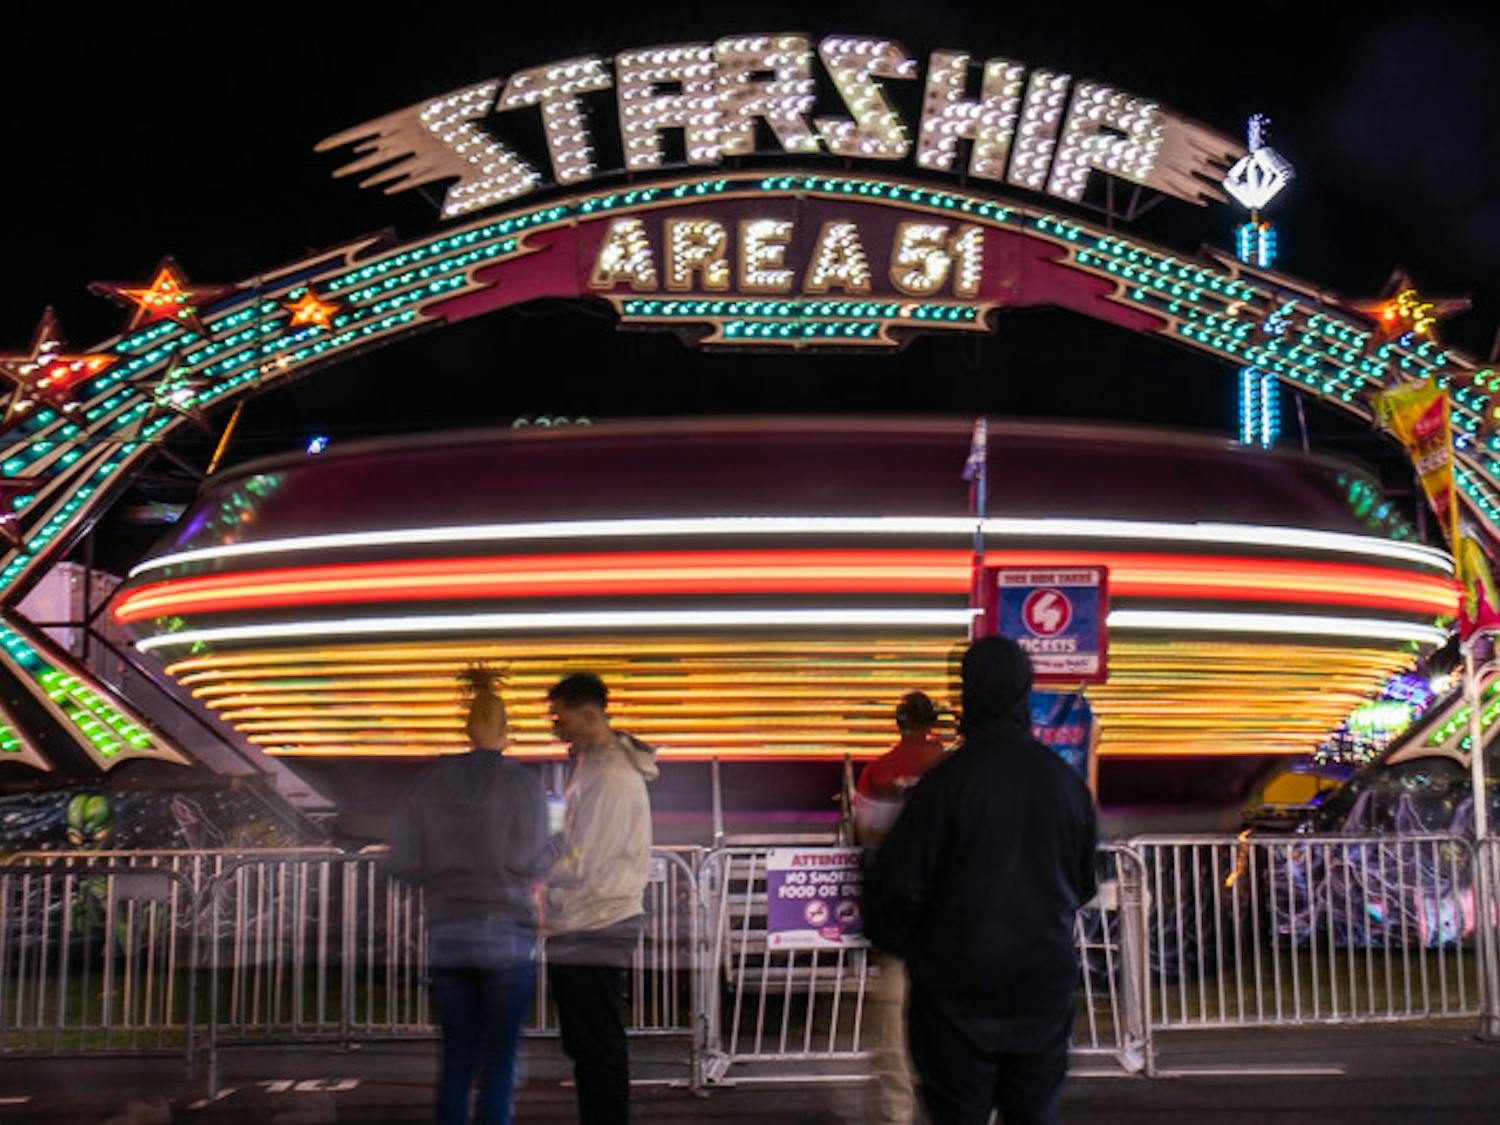 The Starship Area 51 ride at the South Carolina State Fair on Oct. 21, 2022. The human-centrifuge is one of the many thrill-rides featured at the state fair that took place from Oct. 12-23, 2022.